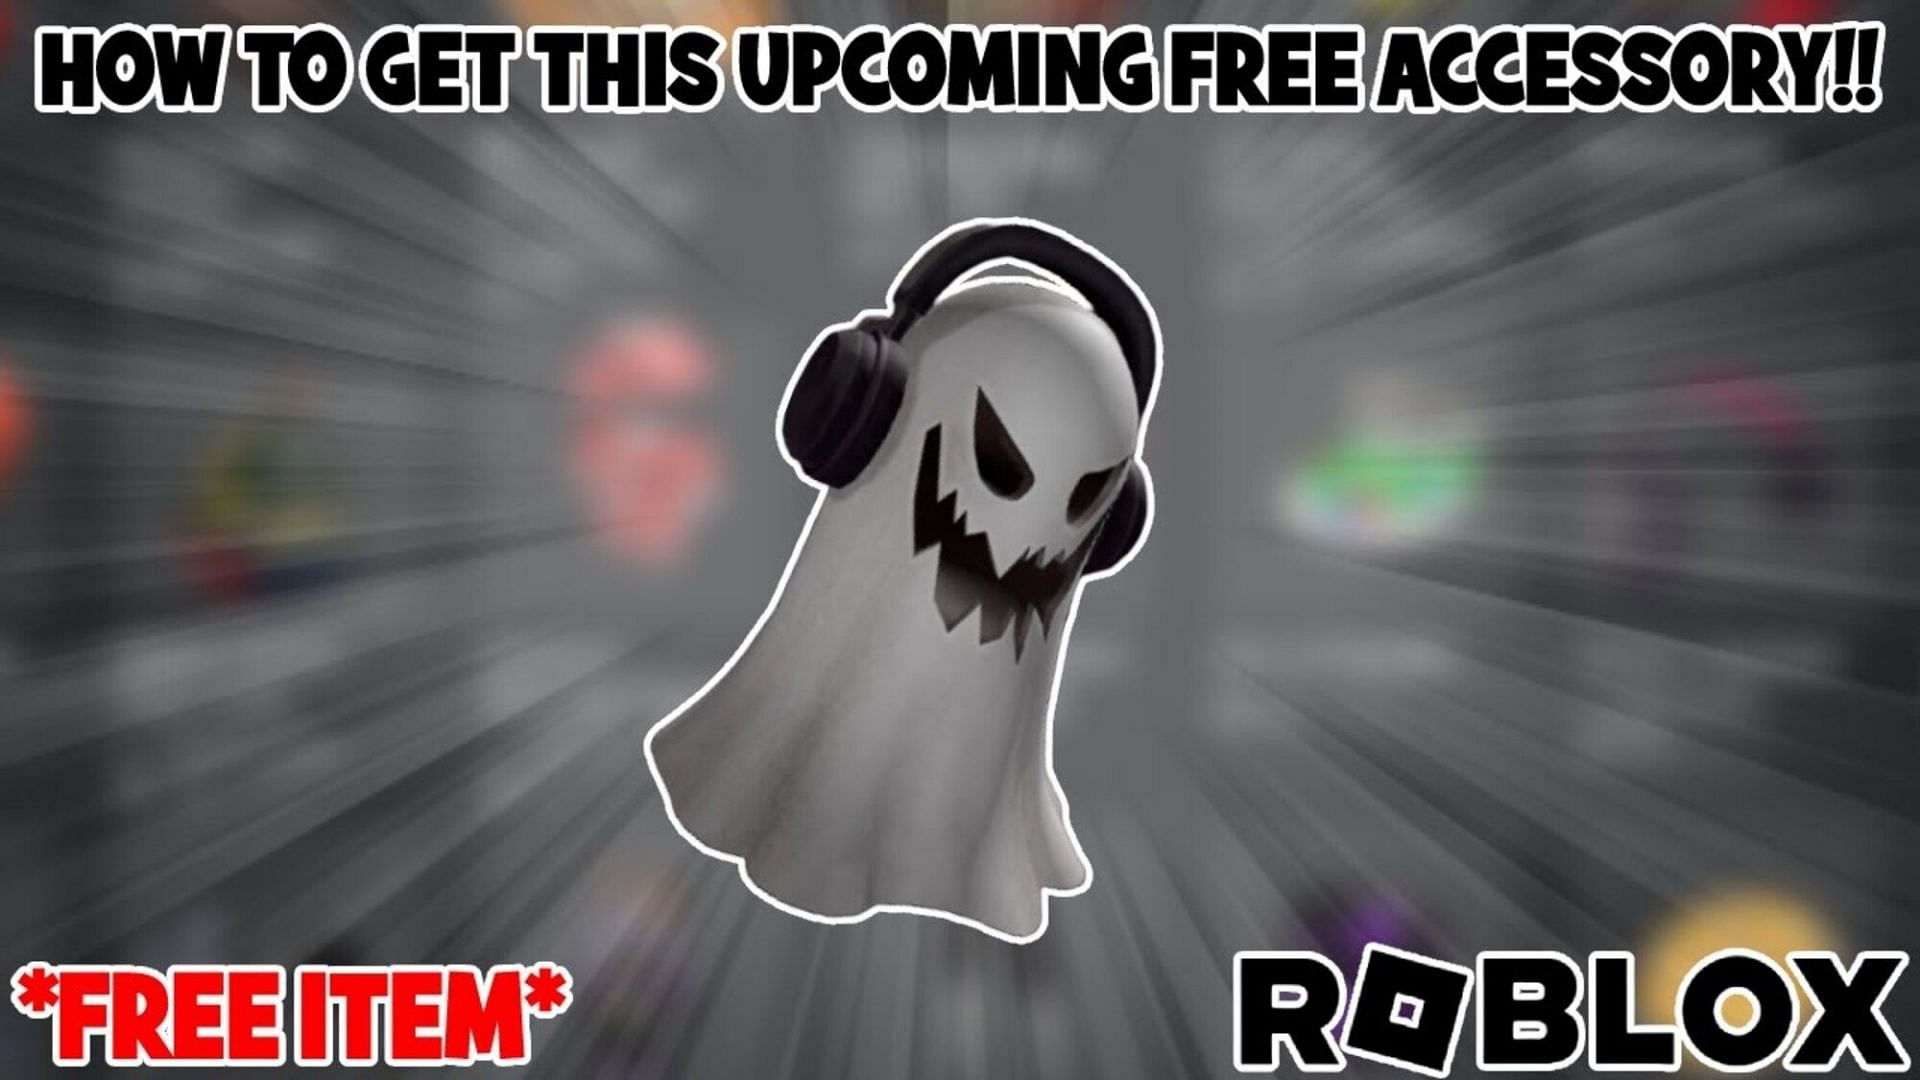 8 NEW Roblox PROMO CODES 2022 All FREE ROBUX Items in OCTOBER +